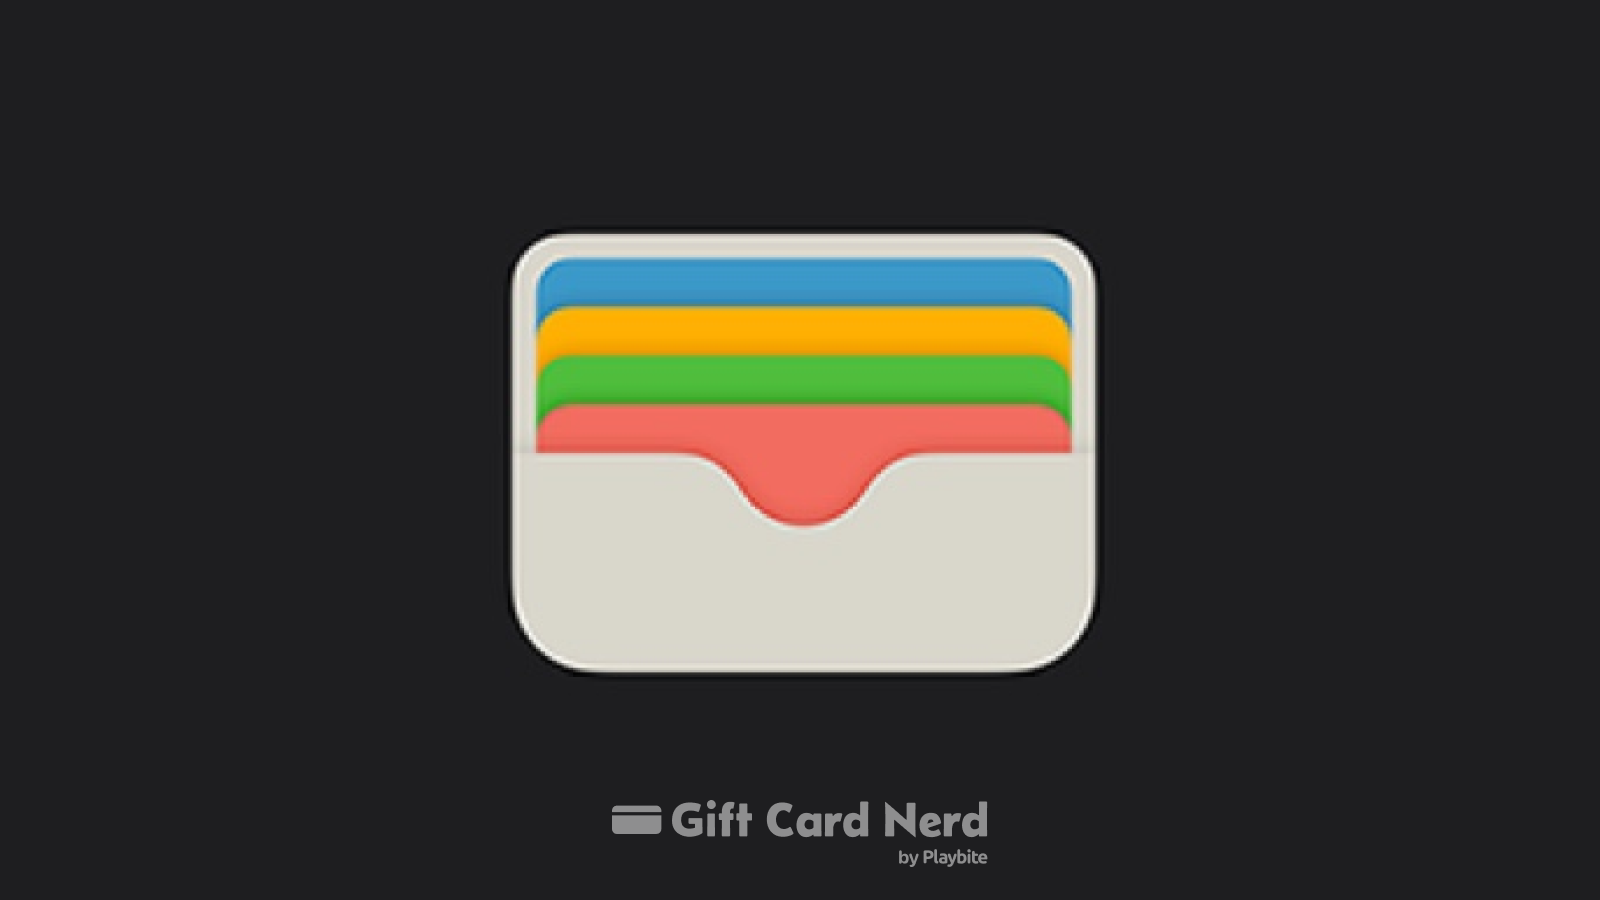 Can You Use an Apple Gift Card on Steam?